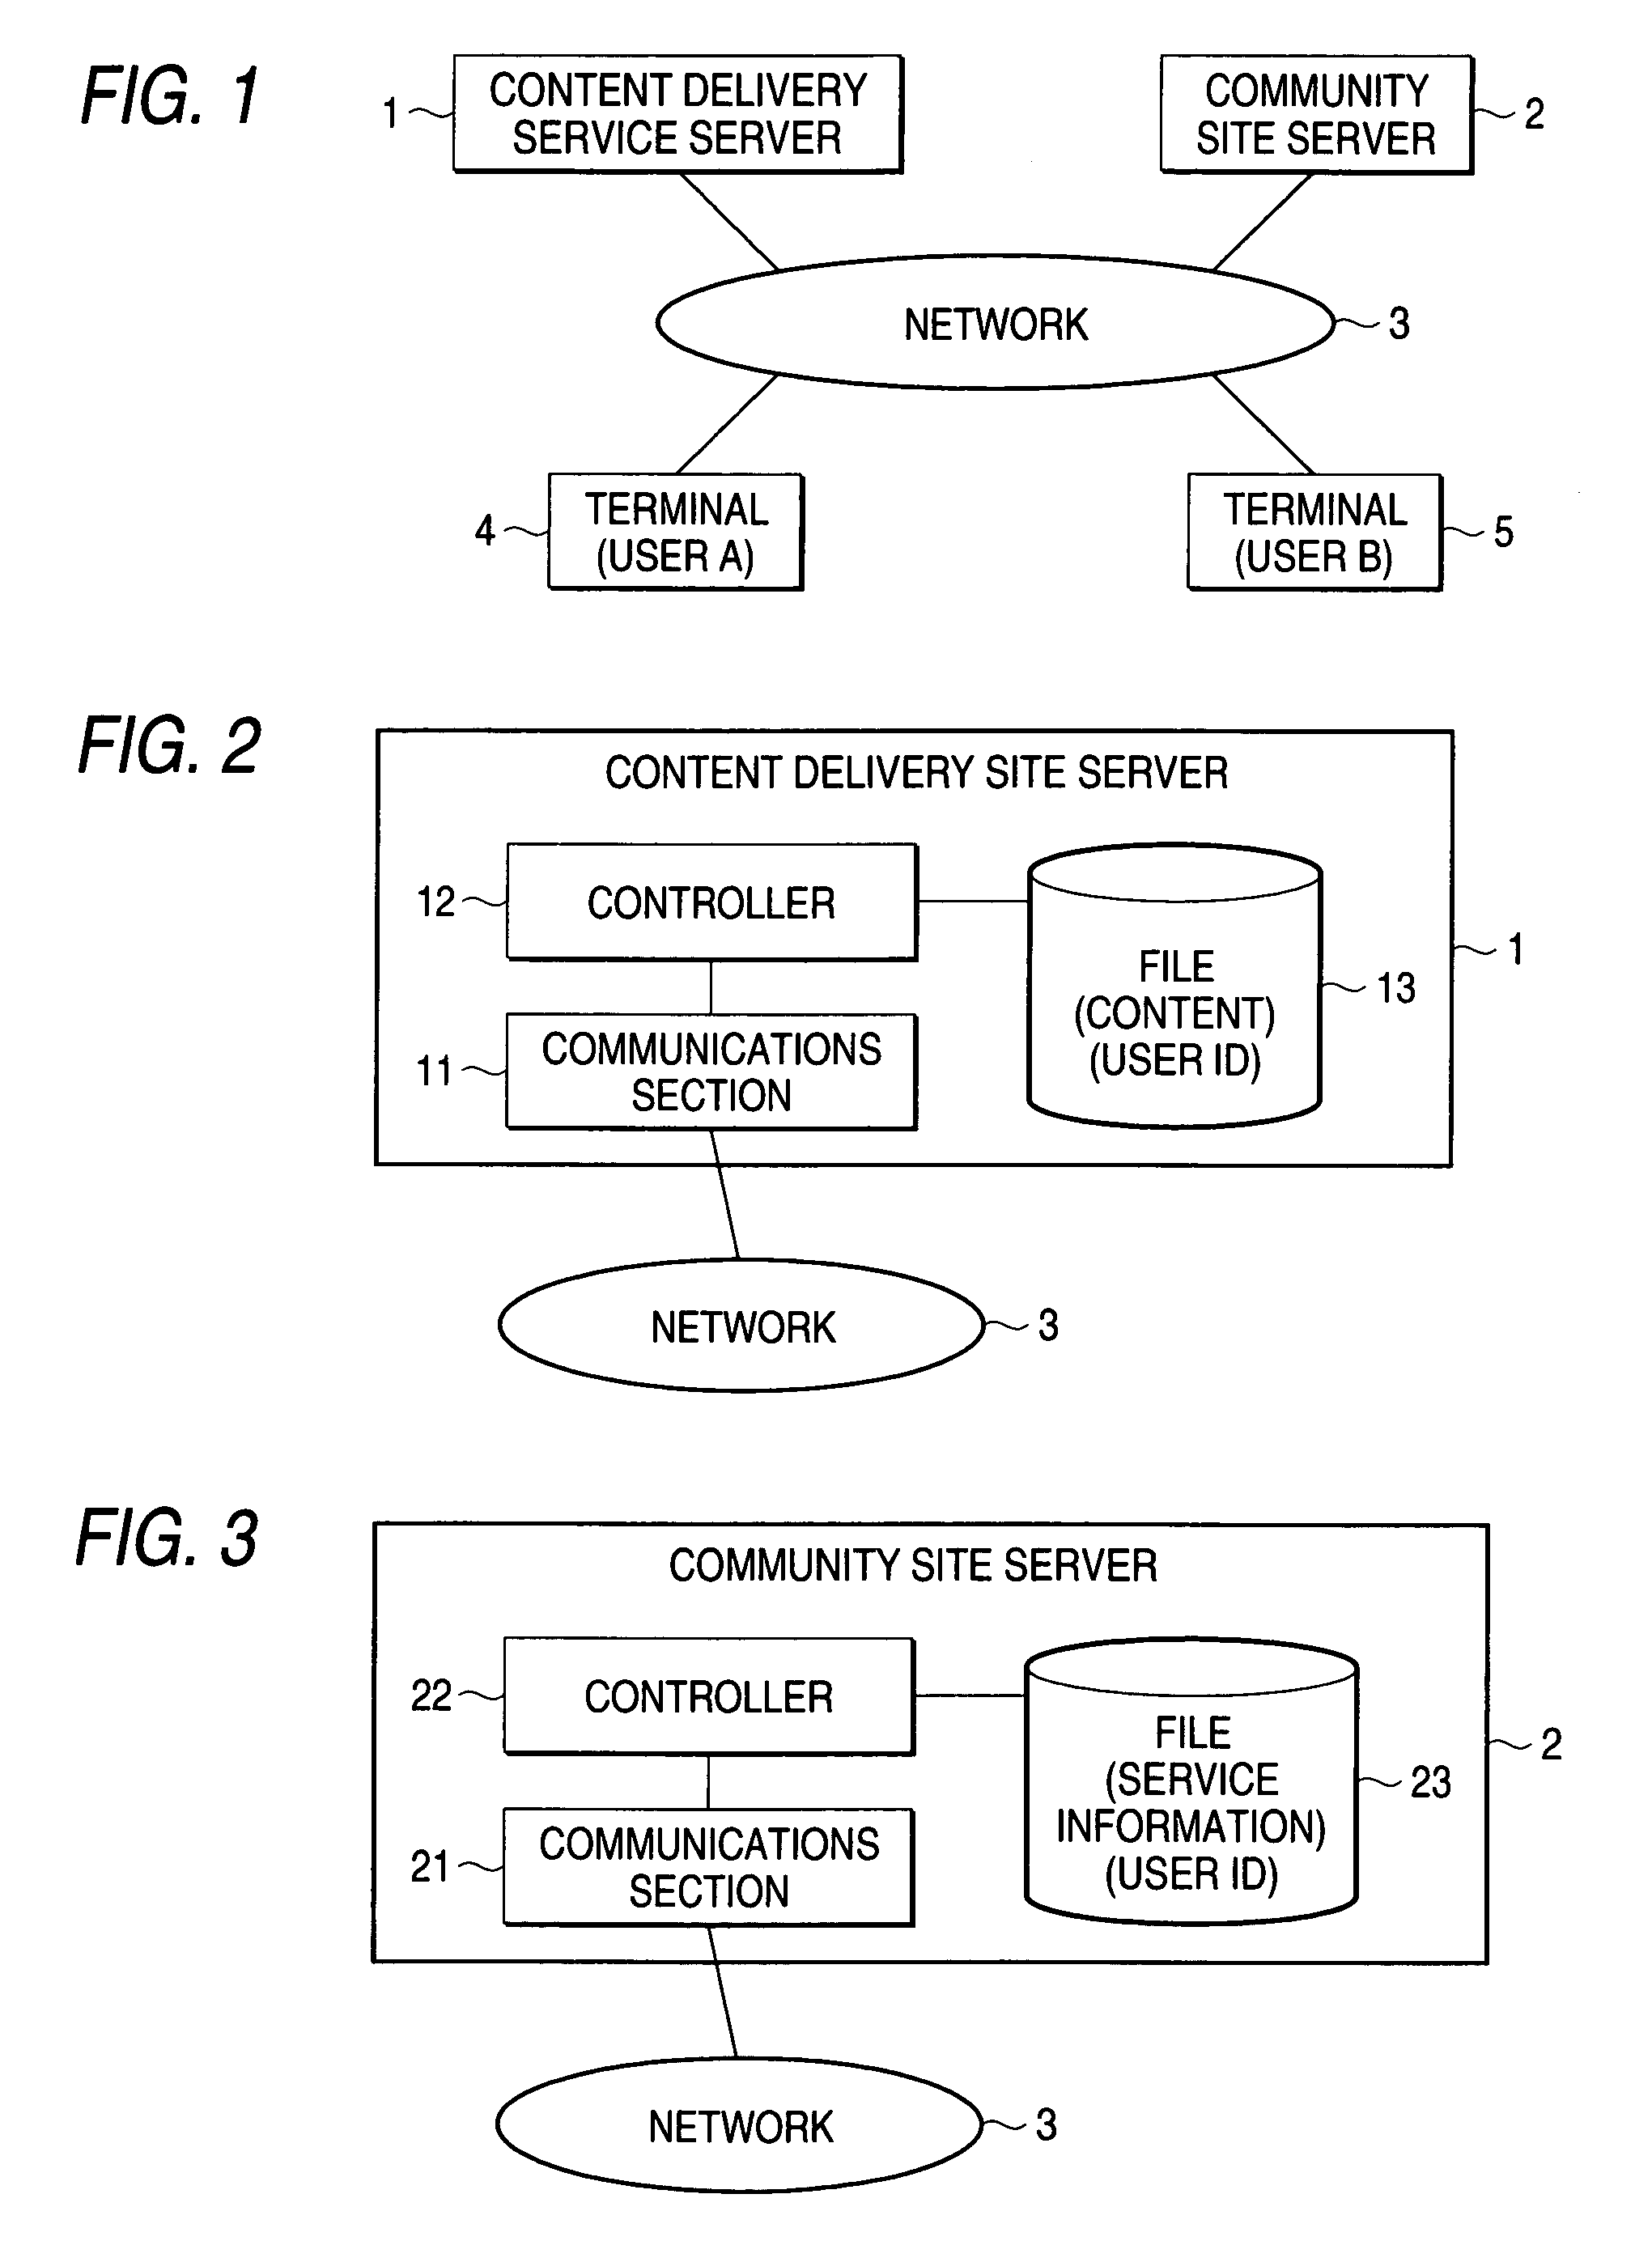 Content distributing system, content distributing service server, and community site server